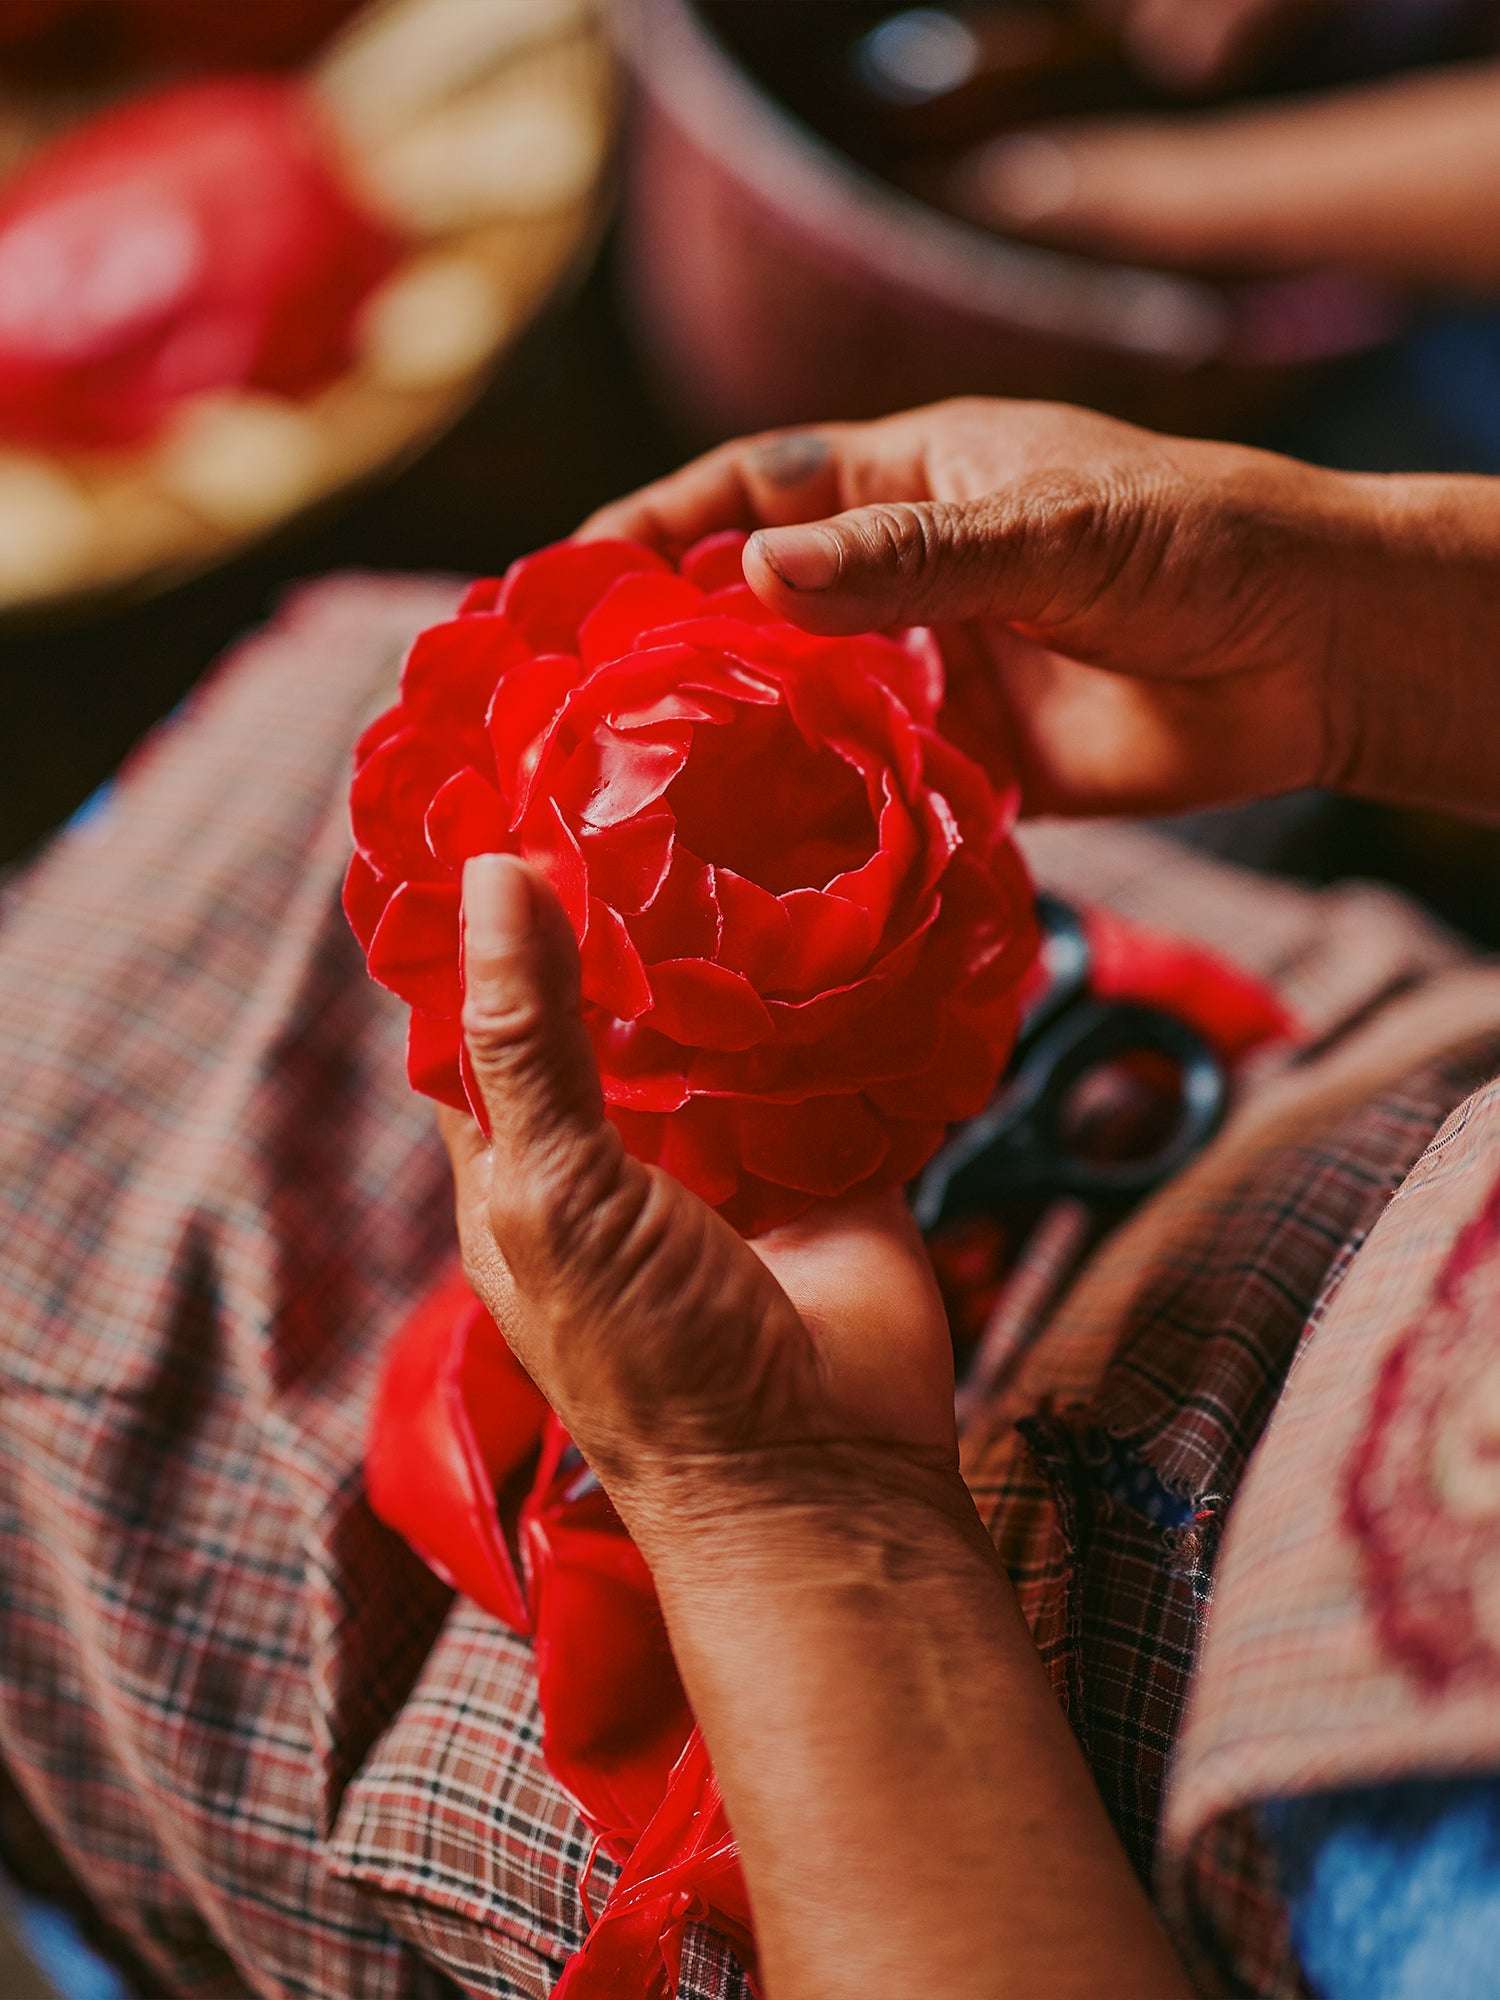 Hands shaping red wax rose candle in TeotitlÃ¡n del Valle, Mexico.